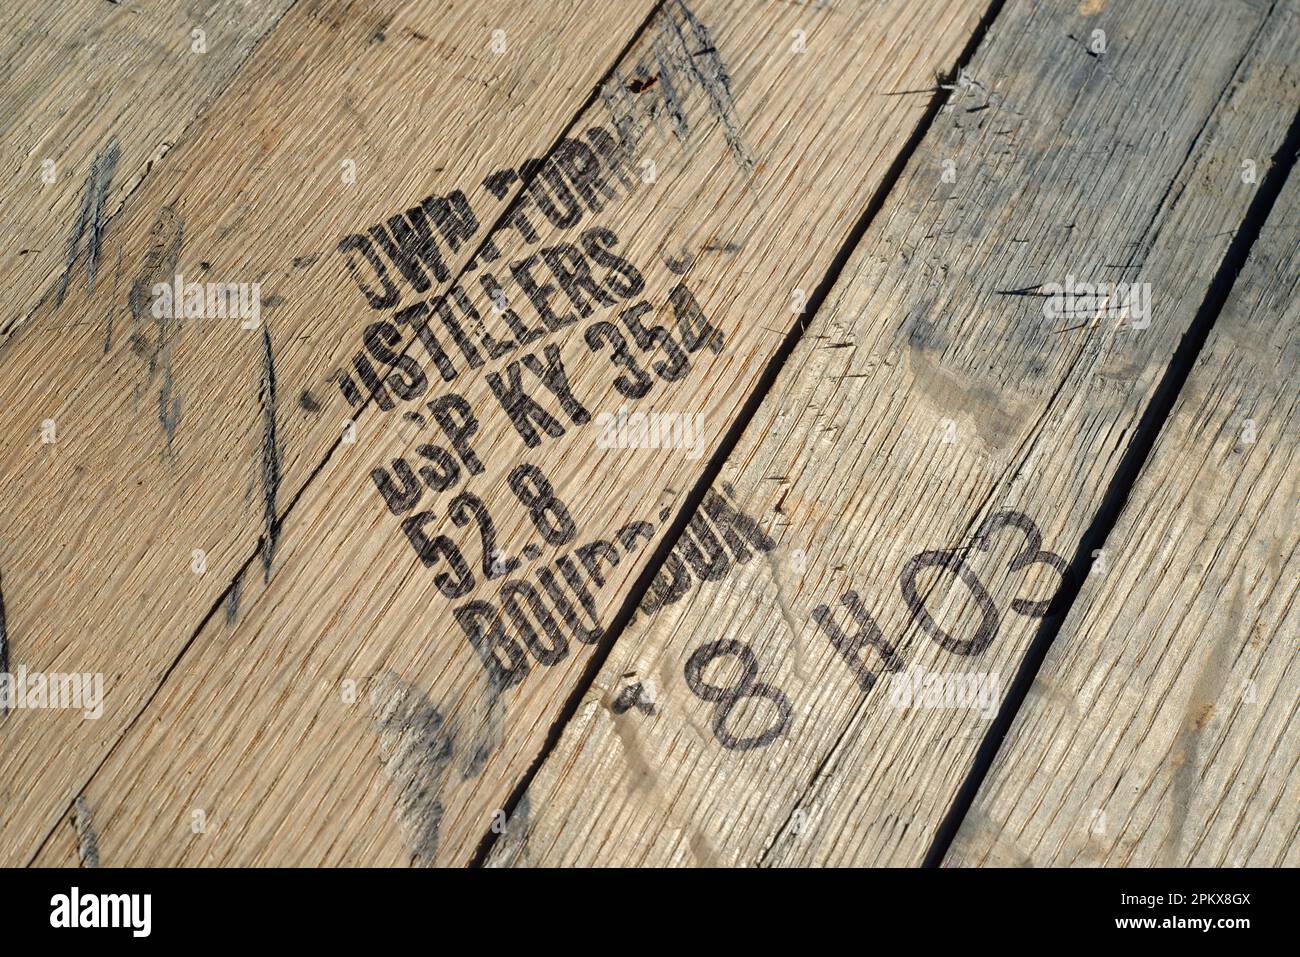 The printed top of a Whiskey or whisky barrel. Brown-Forman corporation. Stock Photo